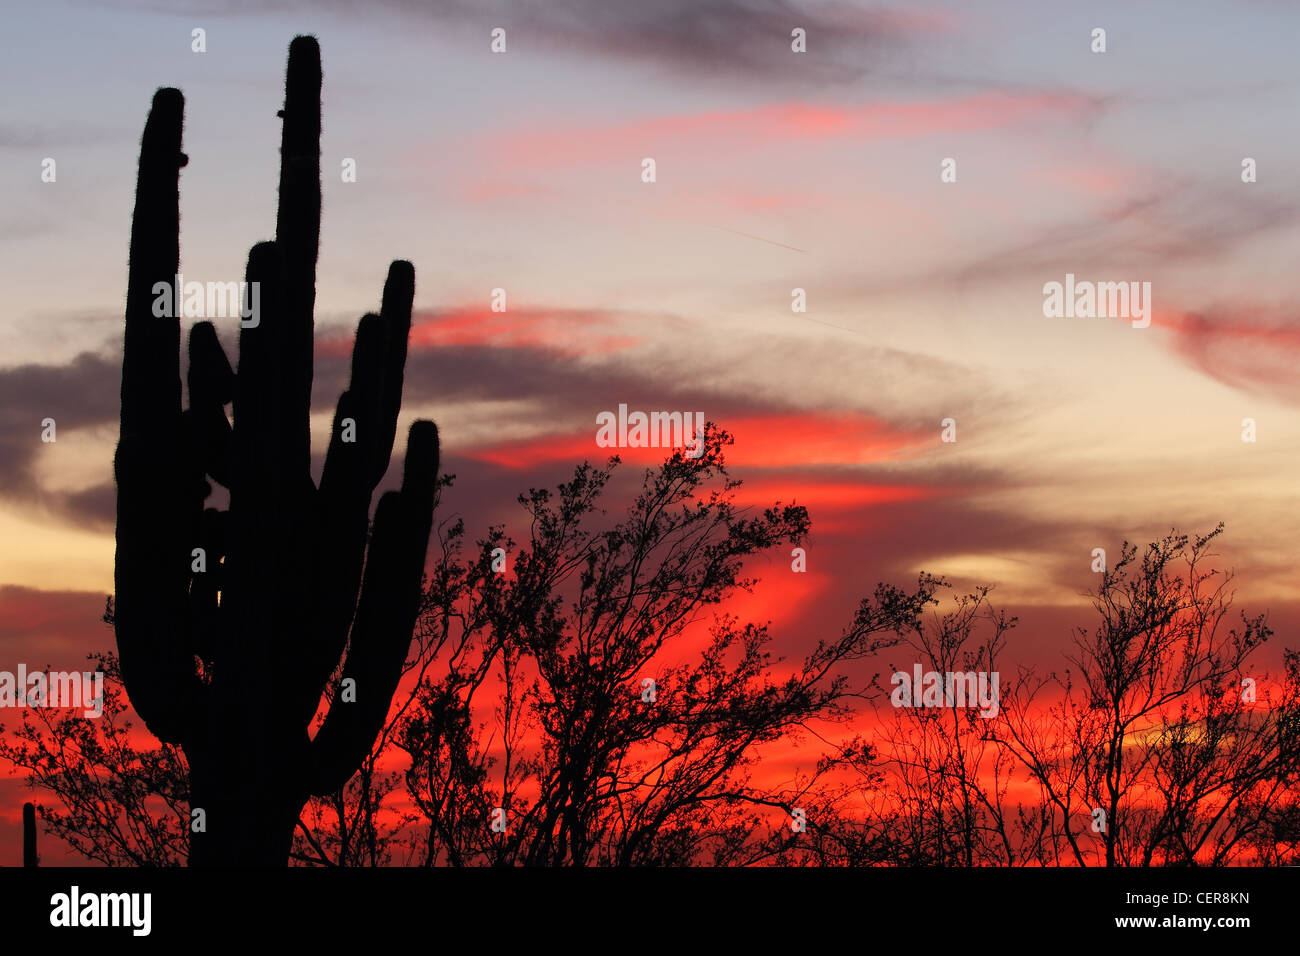 Desert Plant Silhouette High Resolution Stock Photography and Images ...